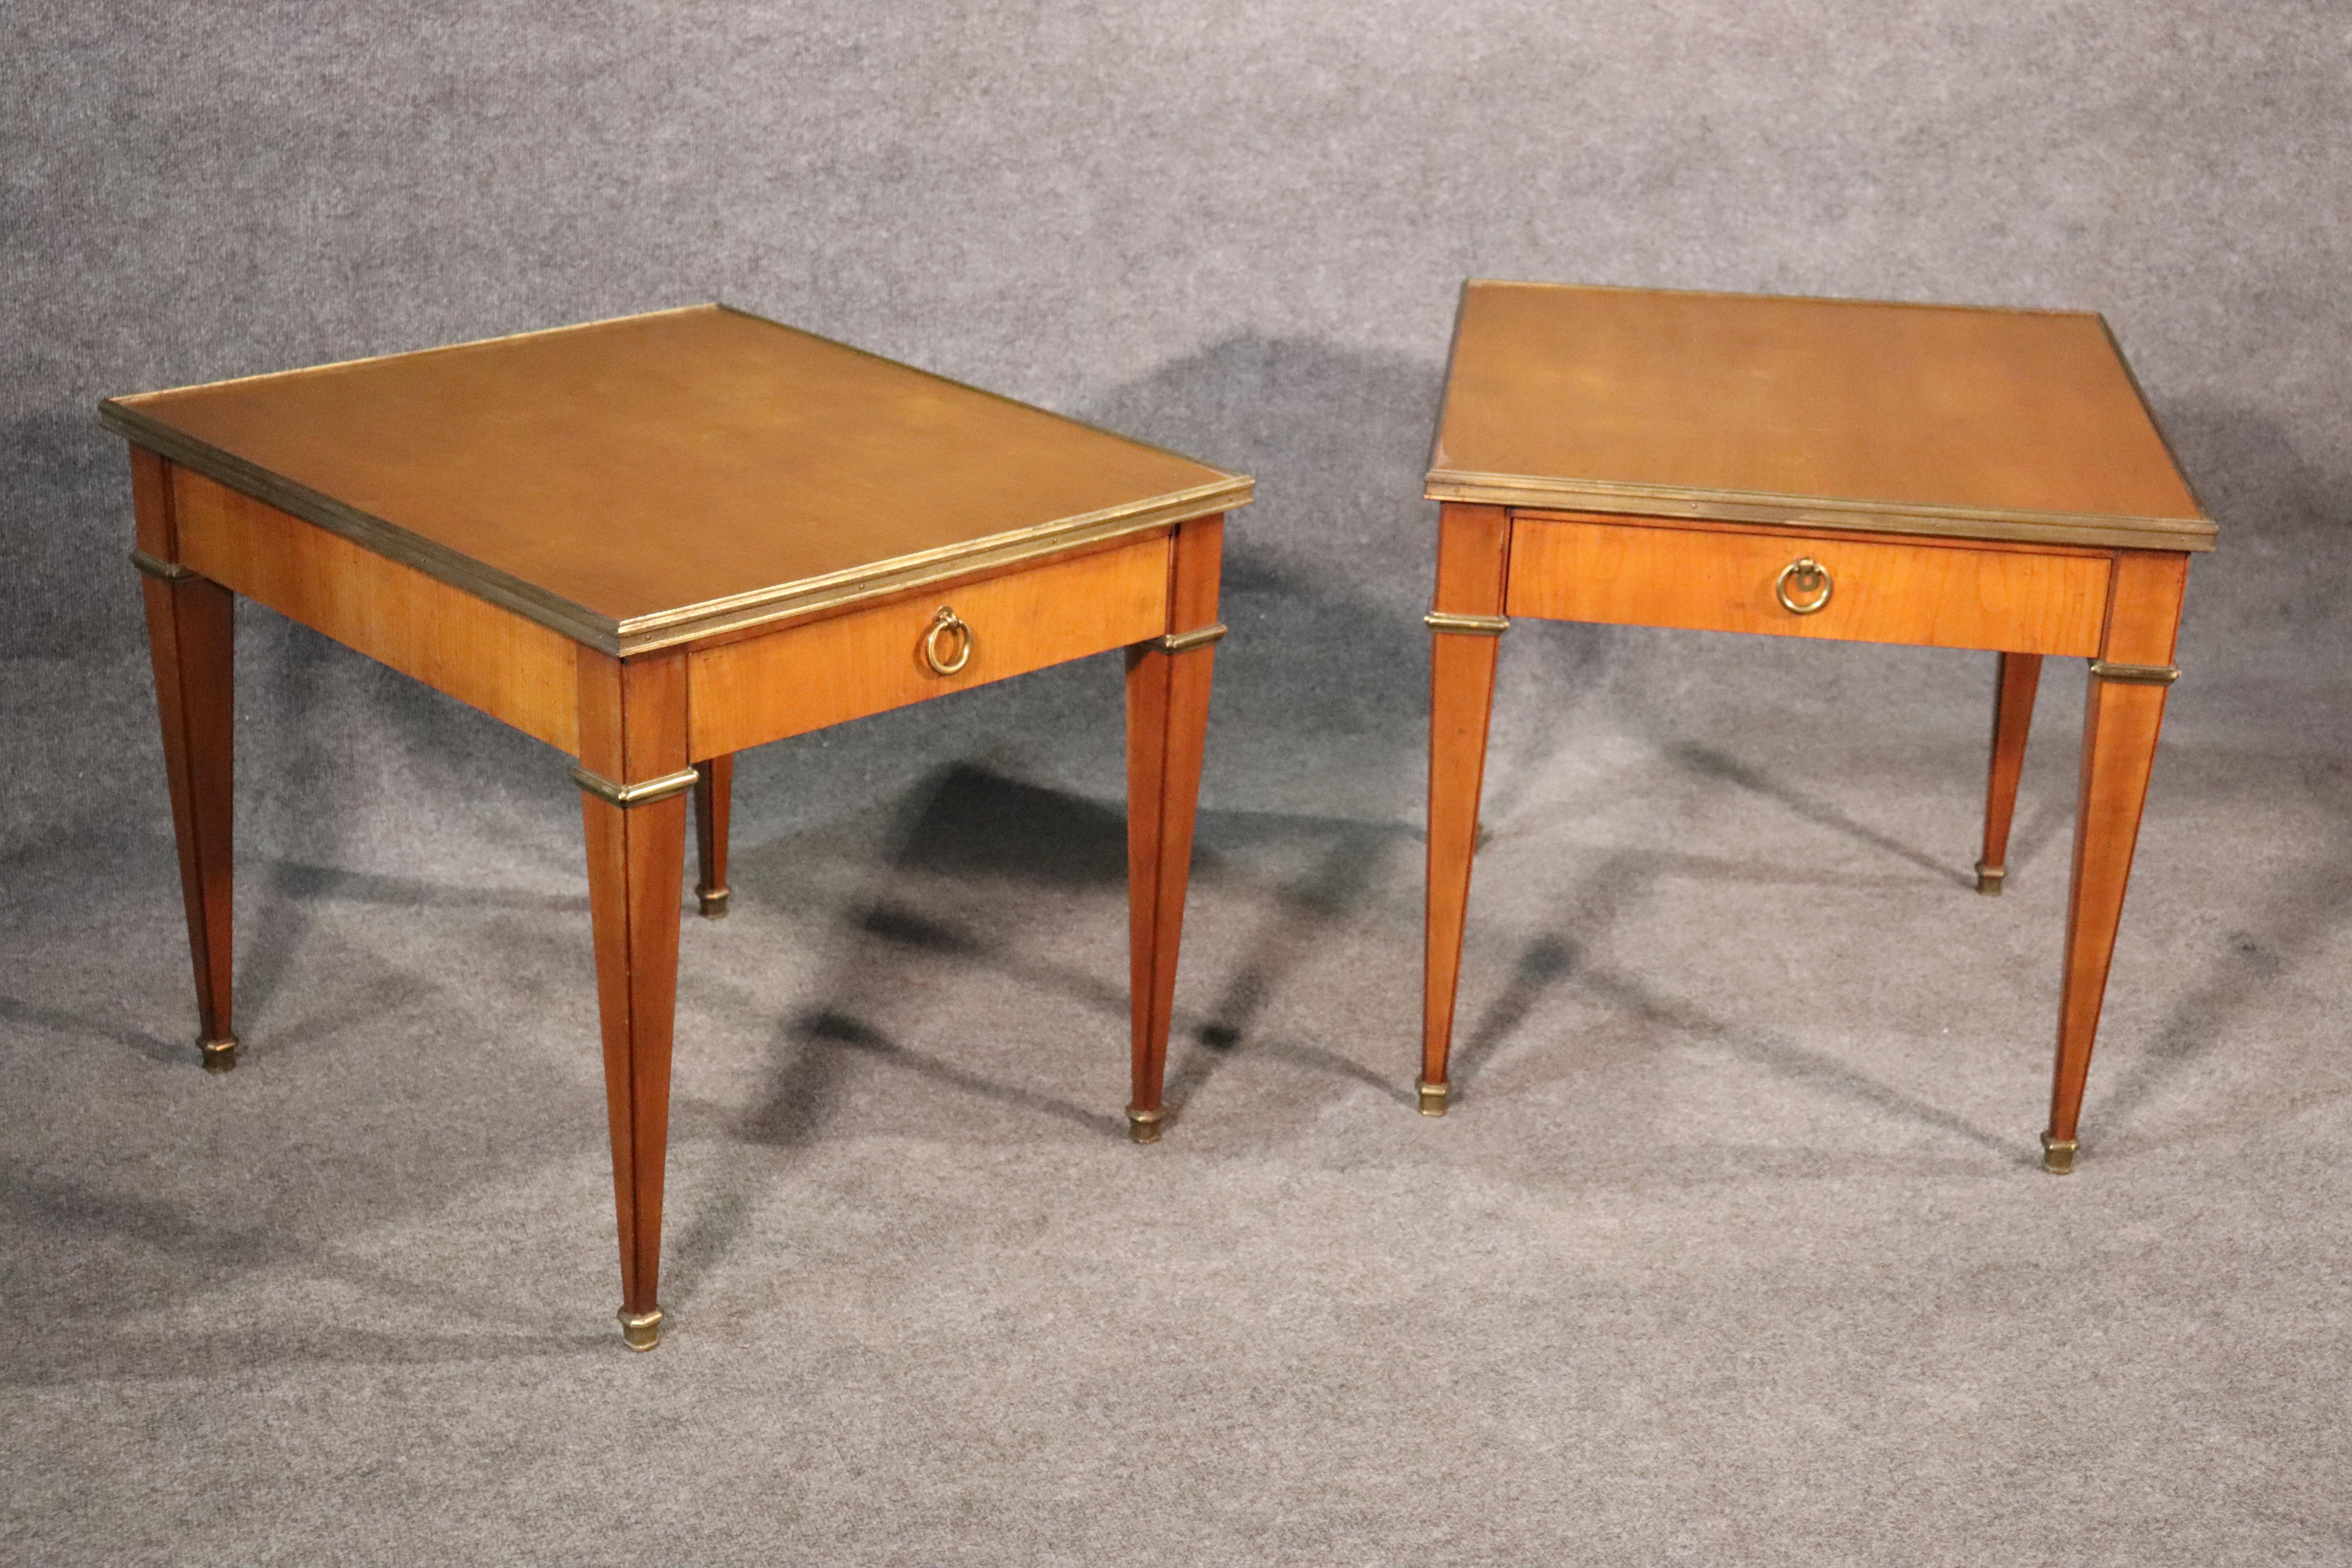 This is a classic pair of sophisticated and yet simple French Directoire style end tables by Baker Furniture company. They are in very good condition and made of cherry with bright brass ormolu and pulls. They are dovetailed and of the highest